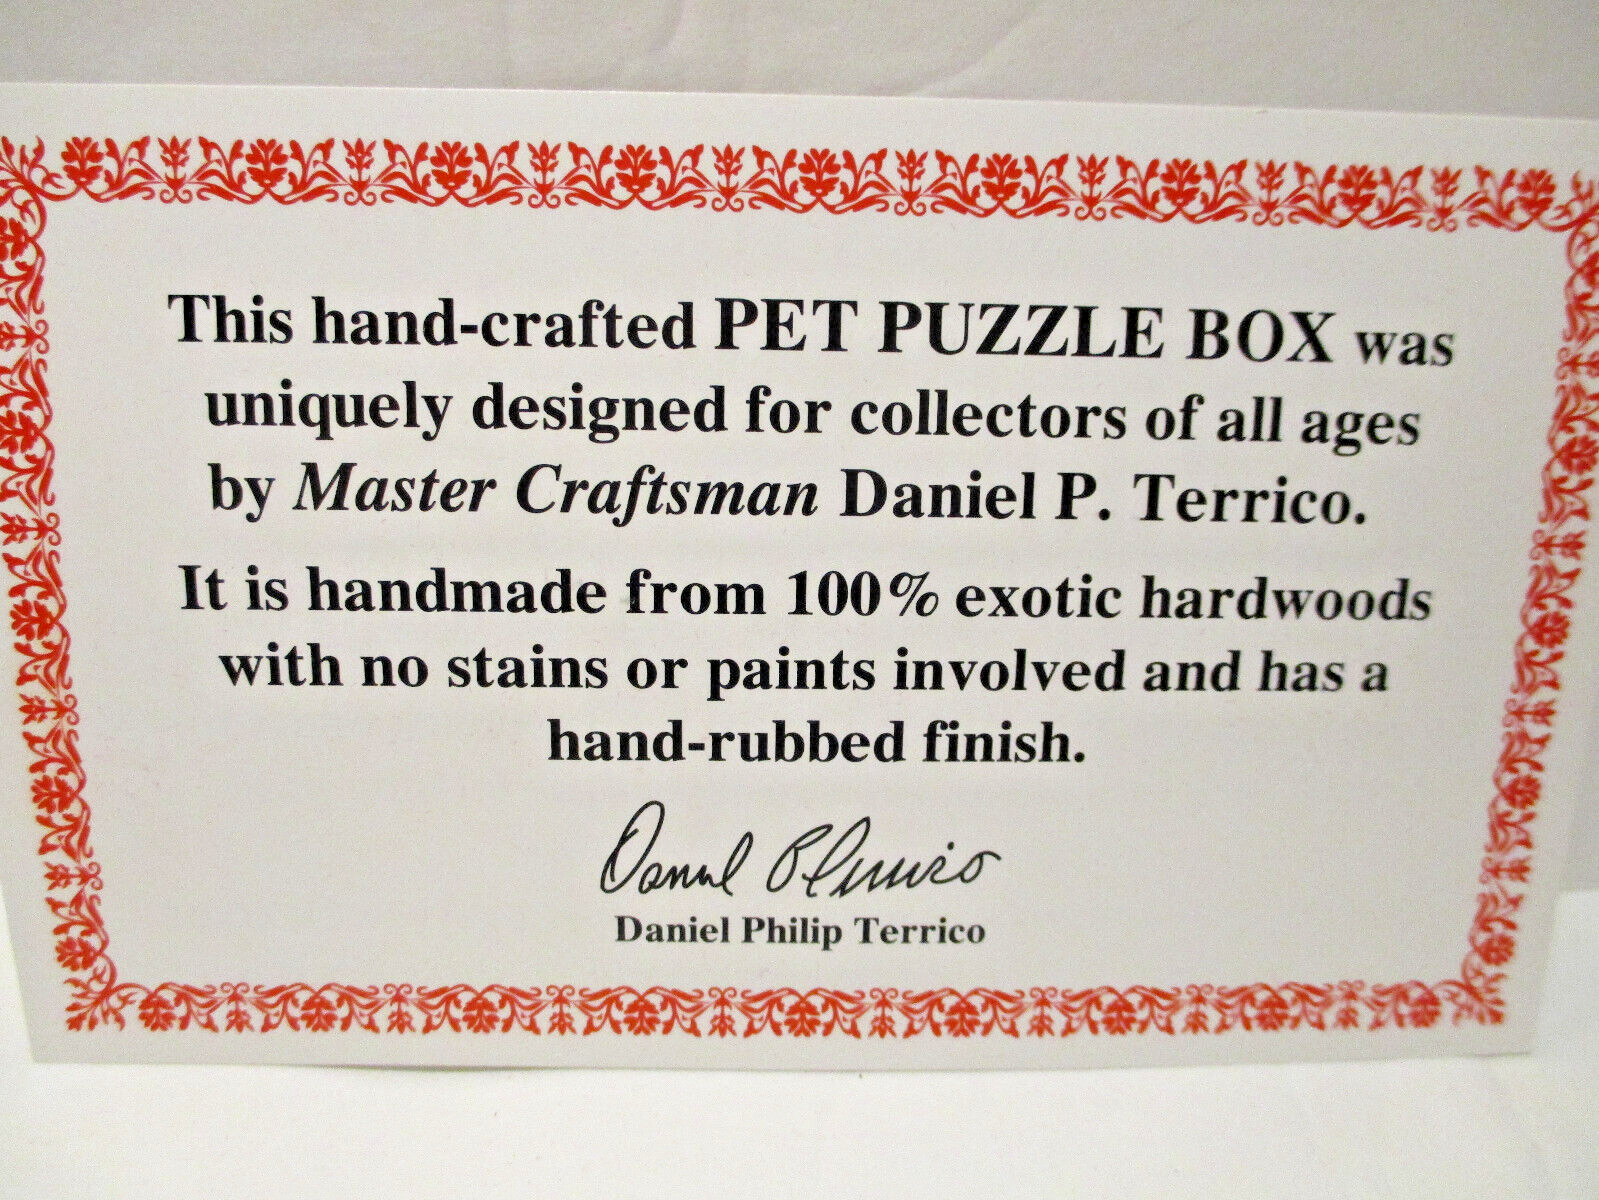 Puzzle Box "PARROT"  D. Terrico - Exotic Woods - Hidden Compartment - NEW IN BOX Без бренда - фотография #6